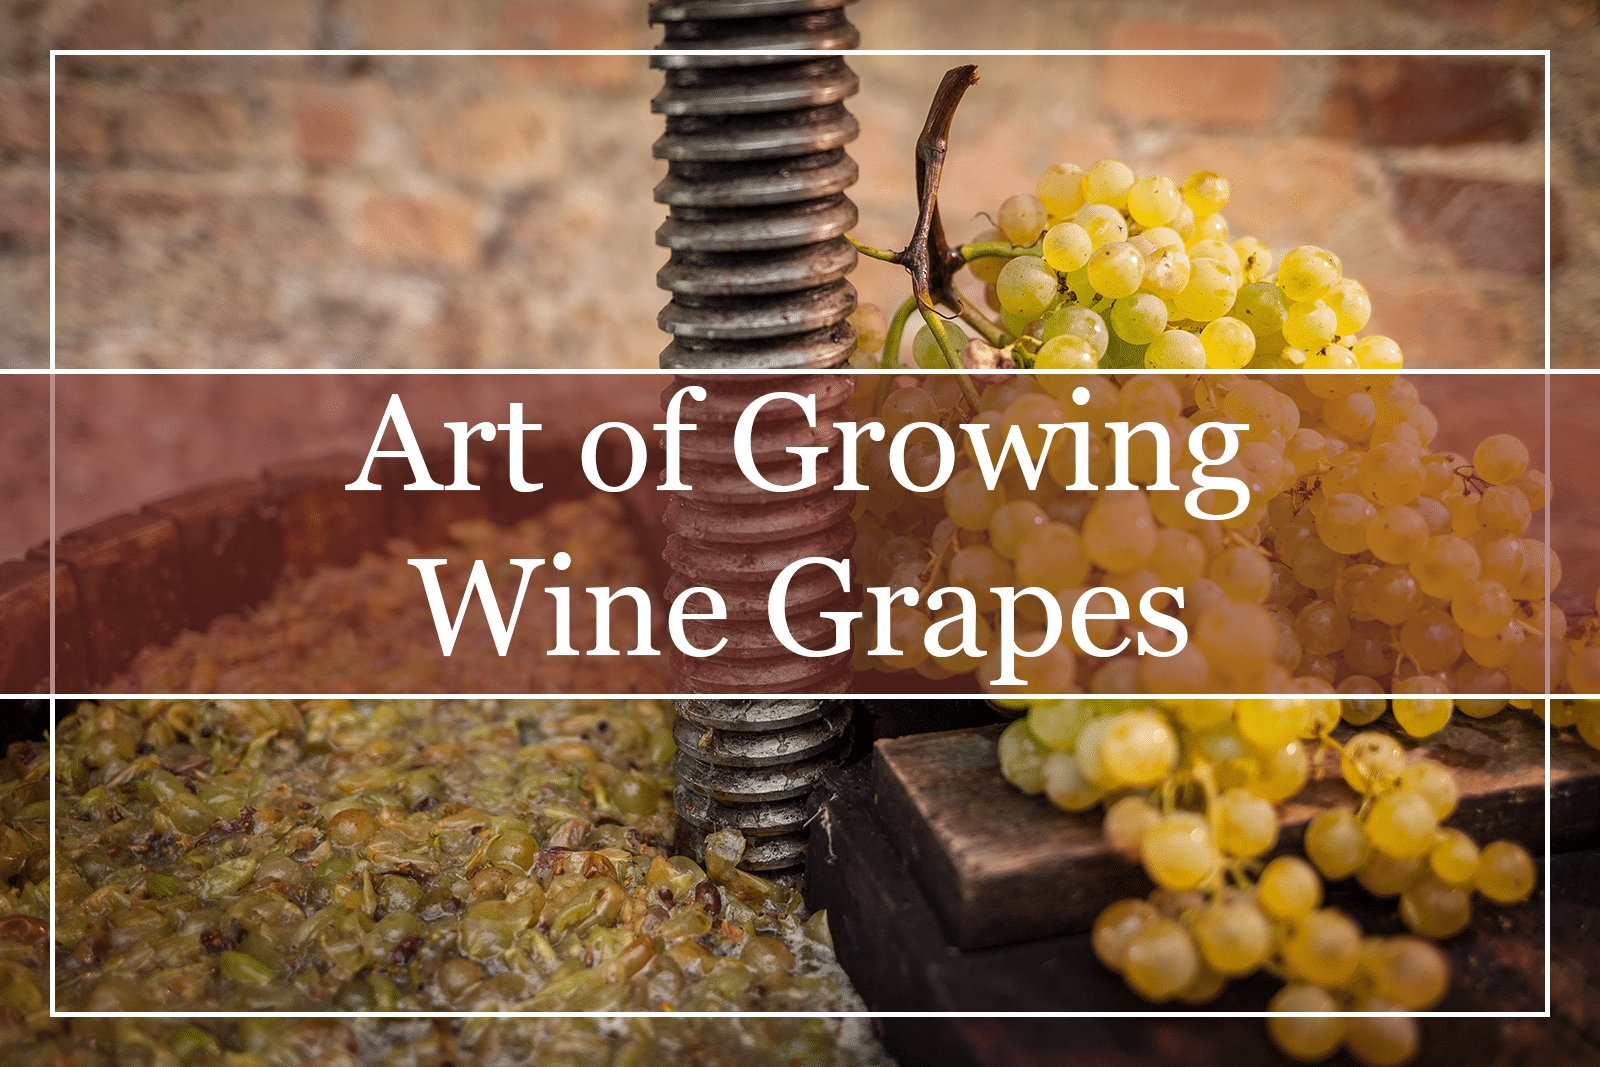 Viniculture – Art of Growing Wine Grapes